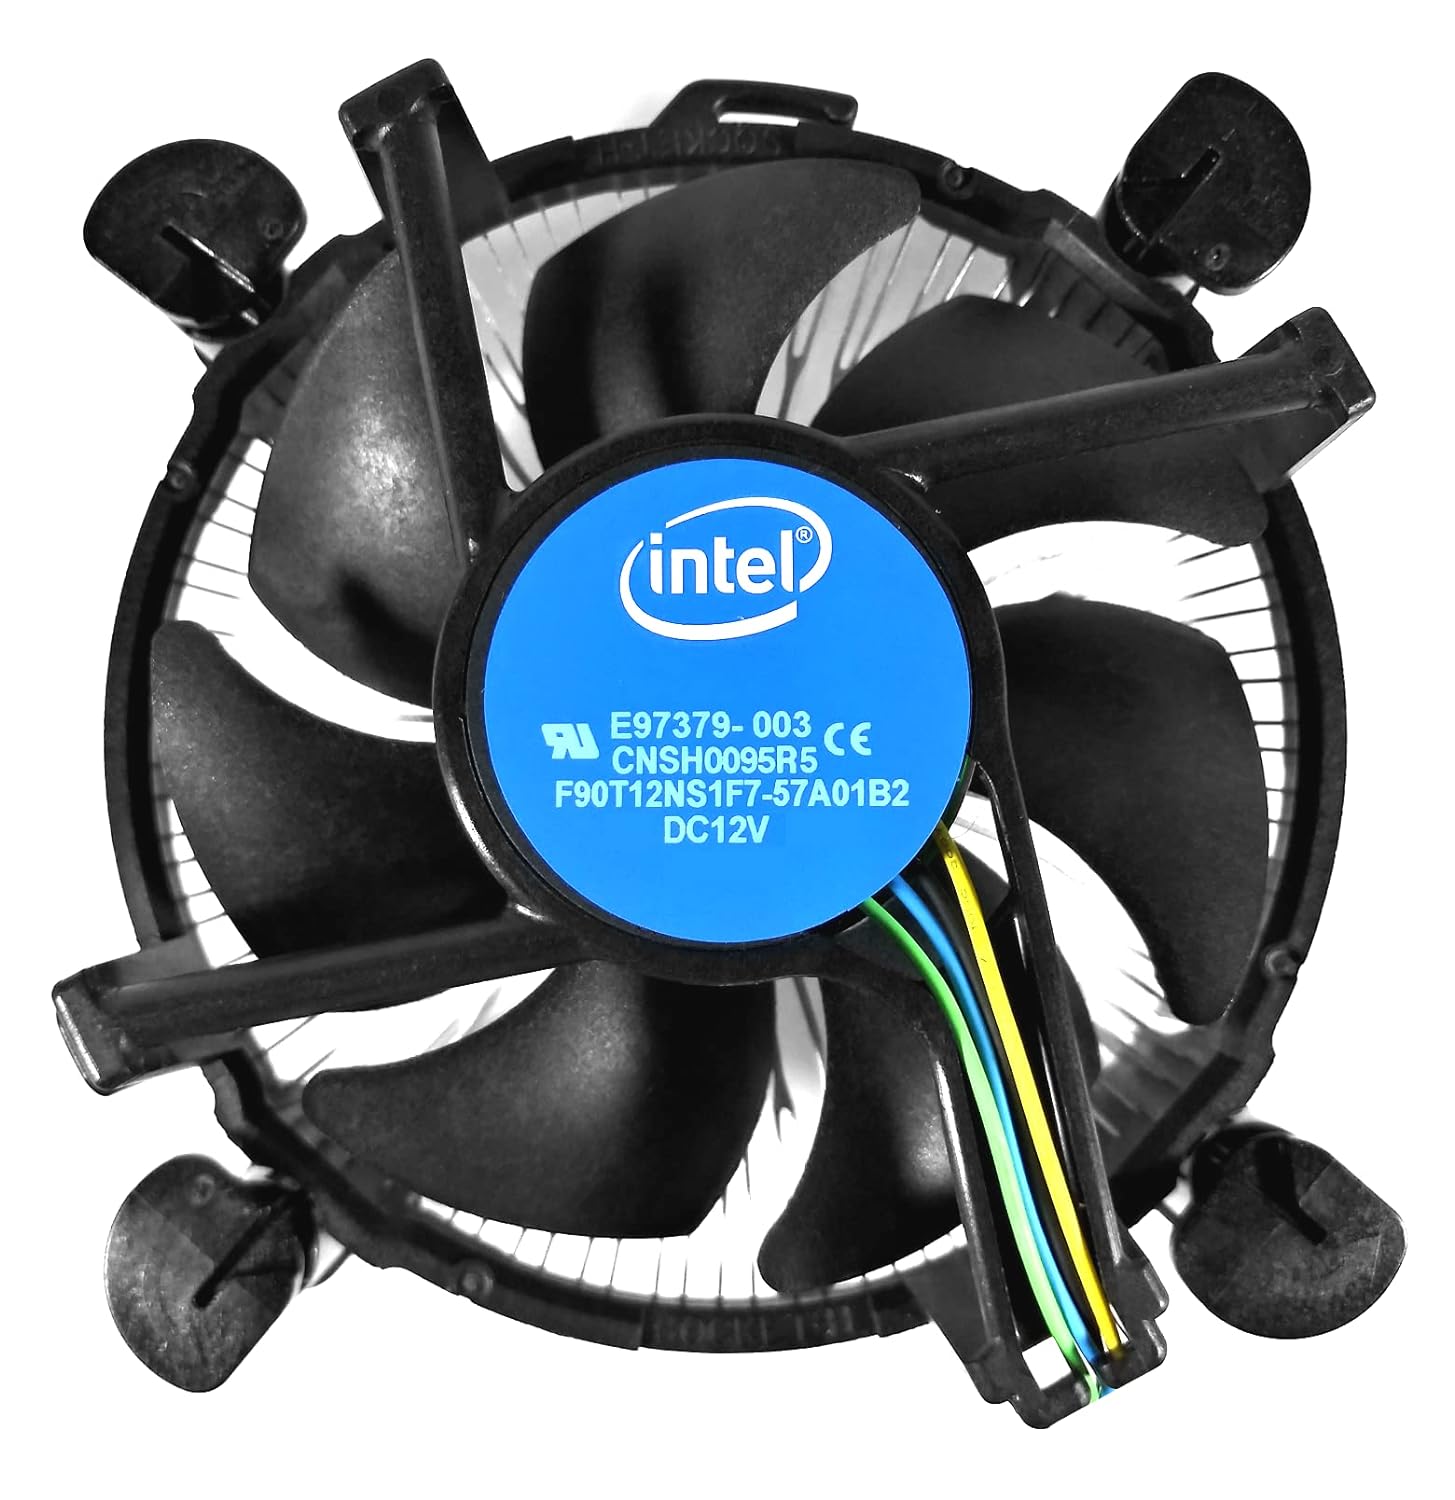 Intel Core i3 / i5 / i7 Socket 1150 / 1151 / 1155 / 1156 4-Pin Connector CPU Cooler With Aluminum Heatsink & 3.5-Inch Fan With TronStore Thermal Paste For Desktop PC Computer (TS9)